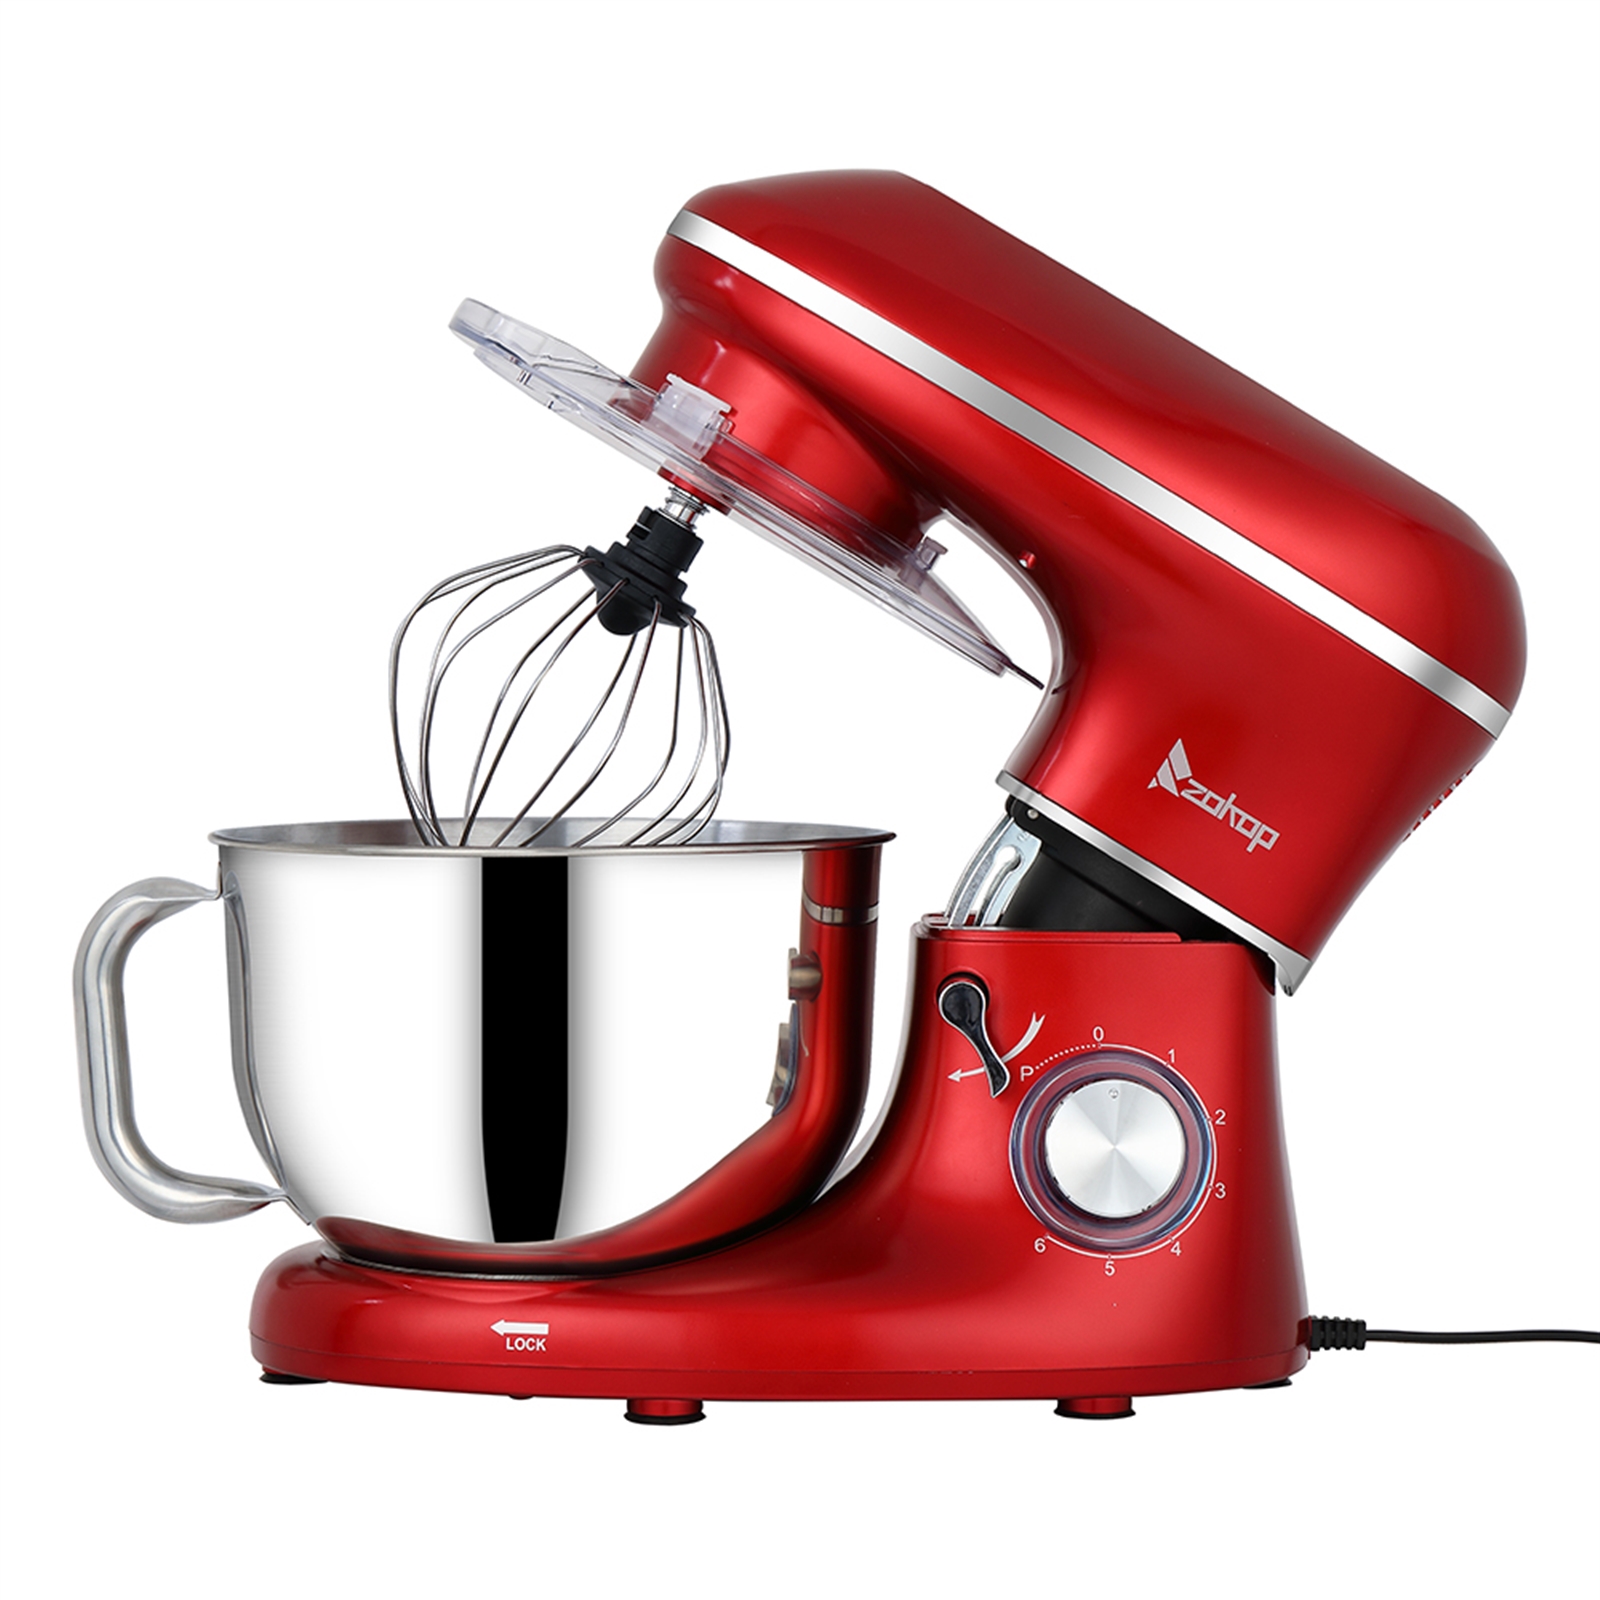 Stand Mixer, 650W 6 Speed 5.8 Quart Tilt-Head Kitchen Electric Food Mixer with Beater, Dough Hook and Wire Whip, Red - image 1 of 7